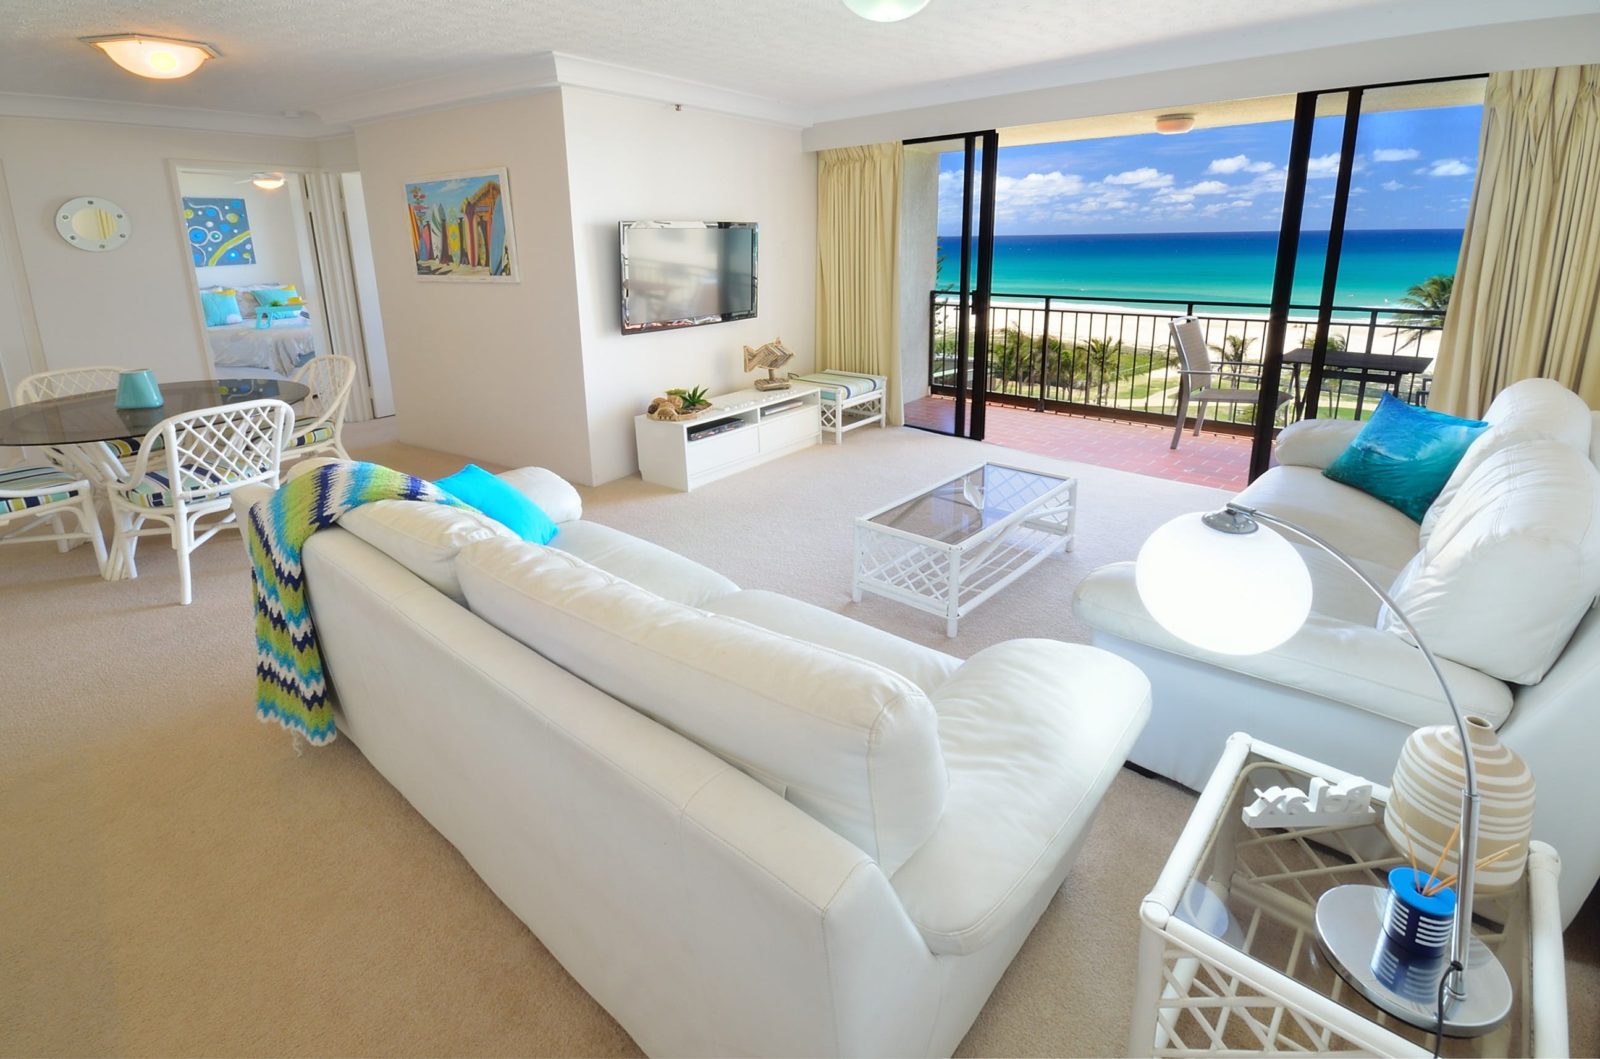 Stunning ocean views from the lounge